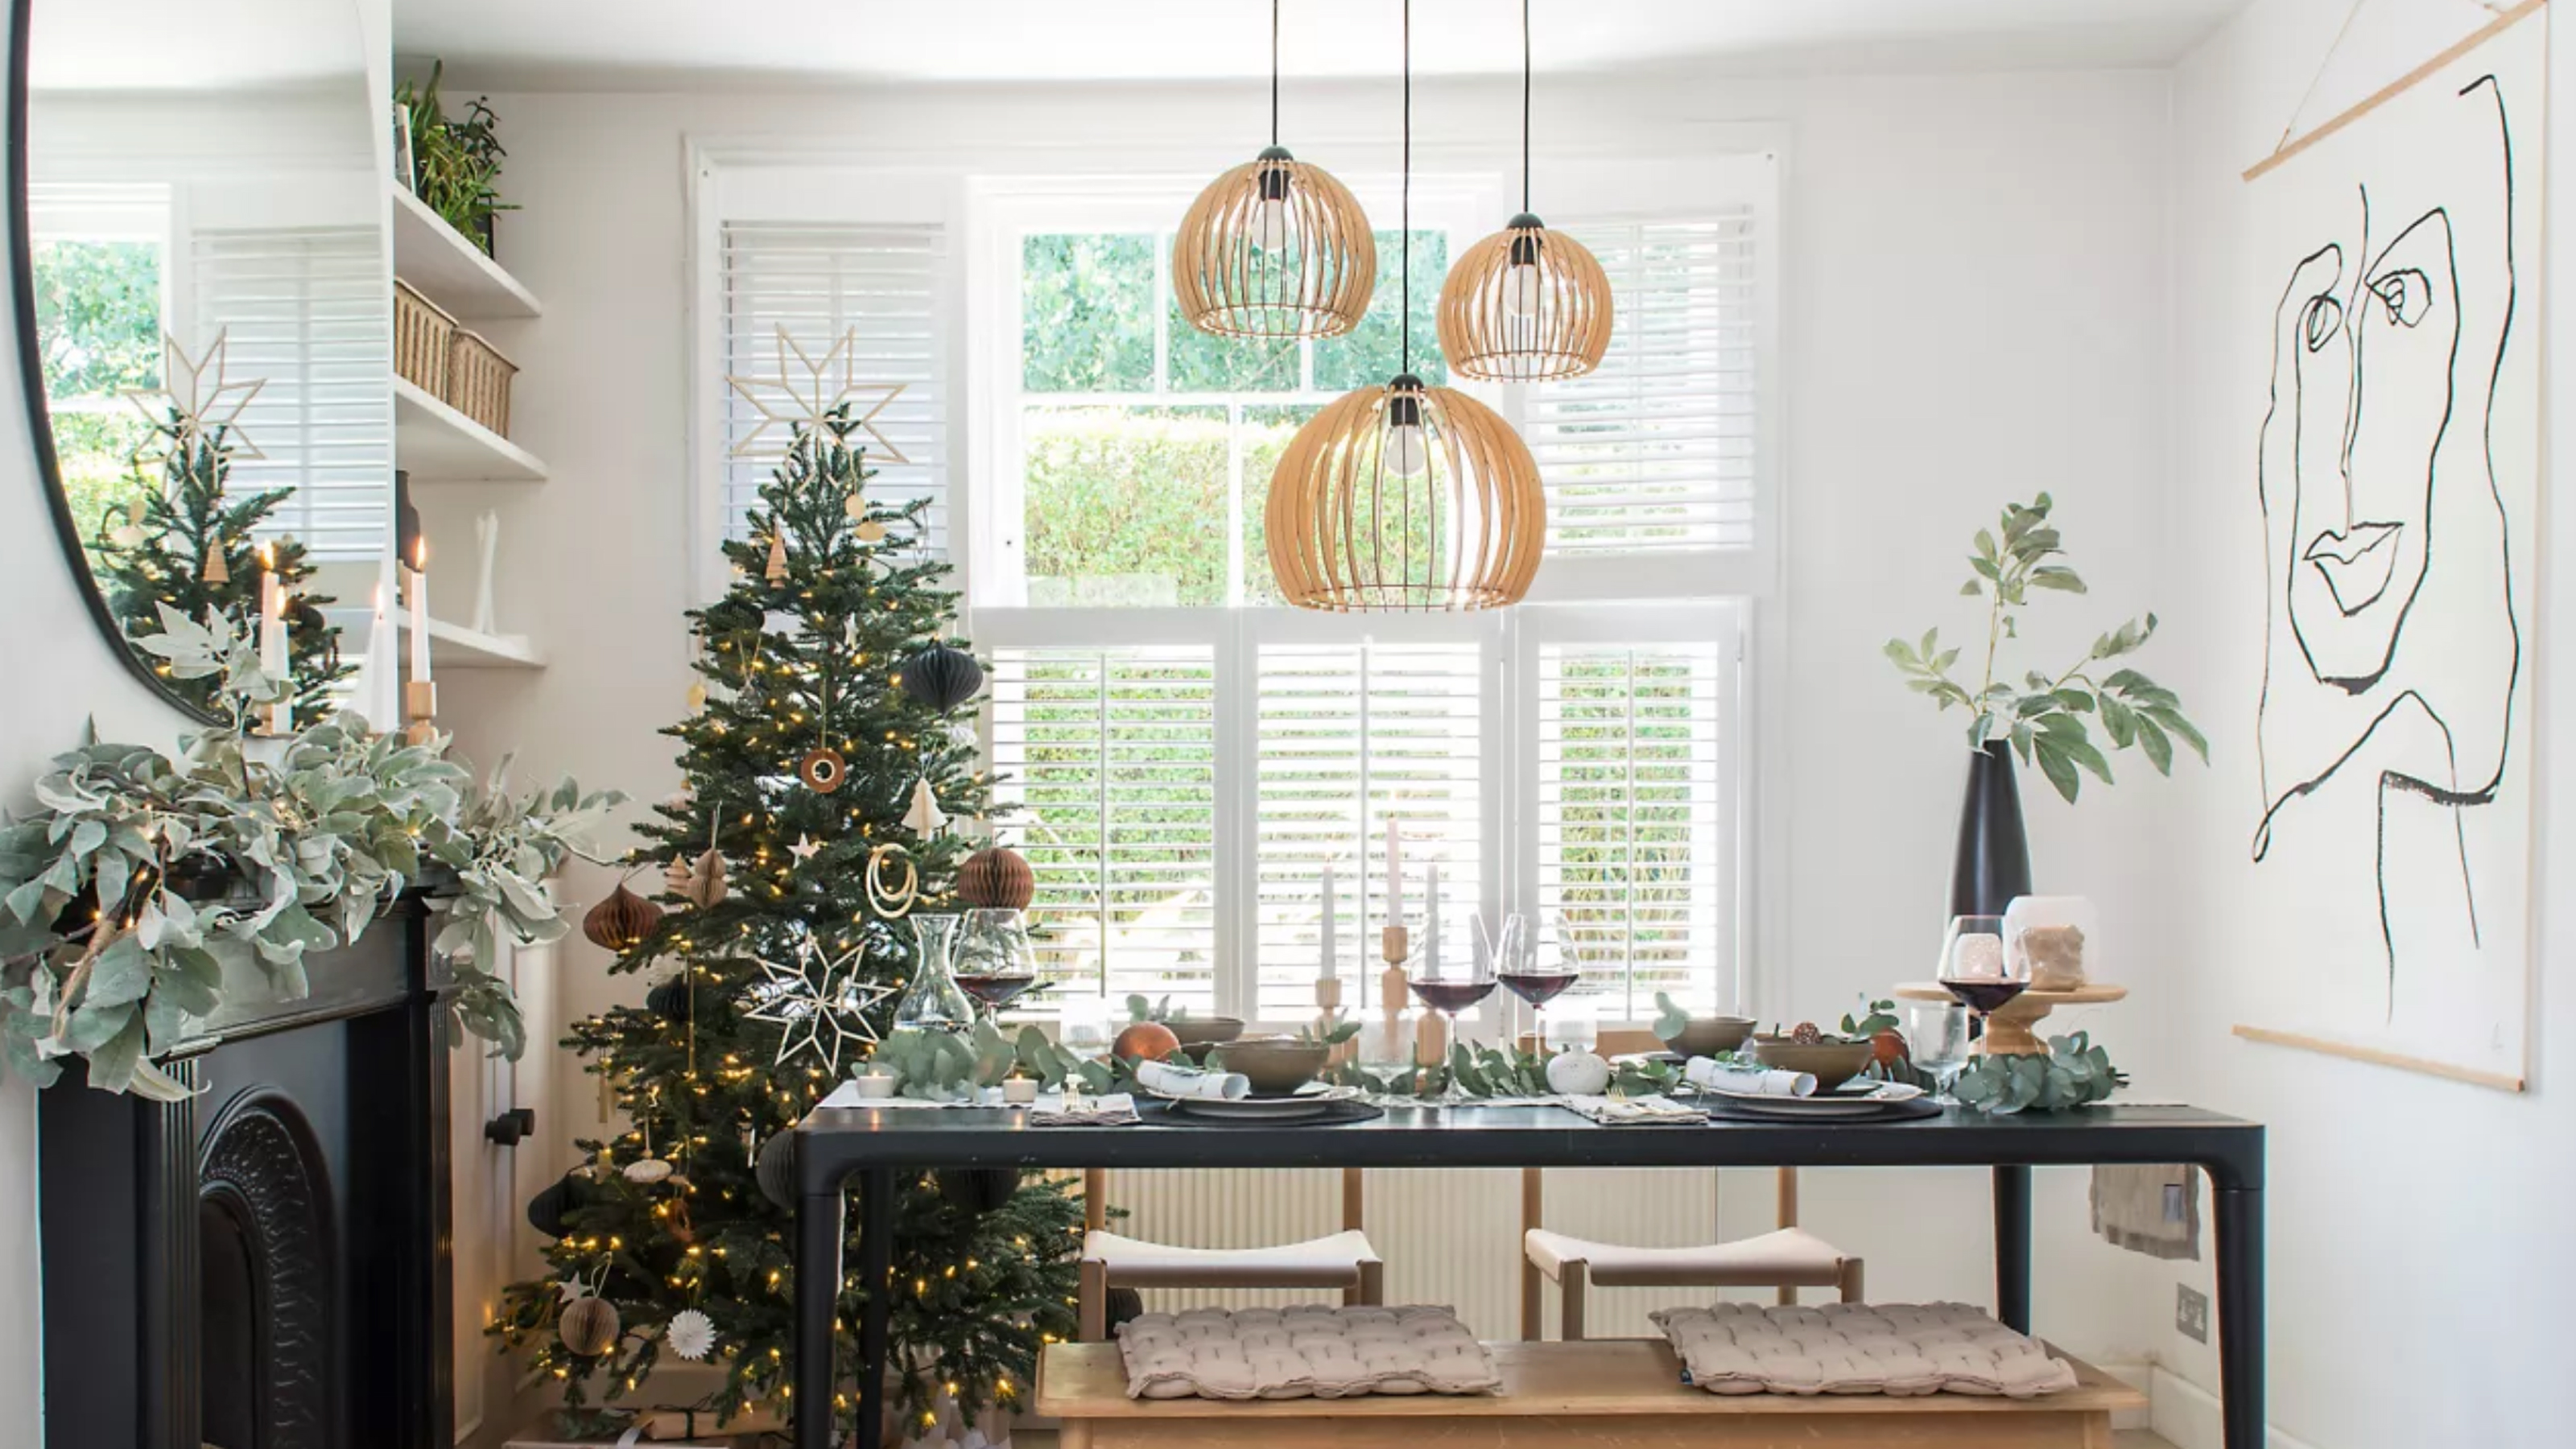 Christmas Gift Guide 2022: Stocking Stuffers For All Ages  Little House of  Four - Creating a beautiful home, one thrifty project at a time.